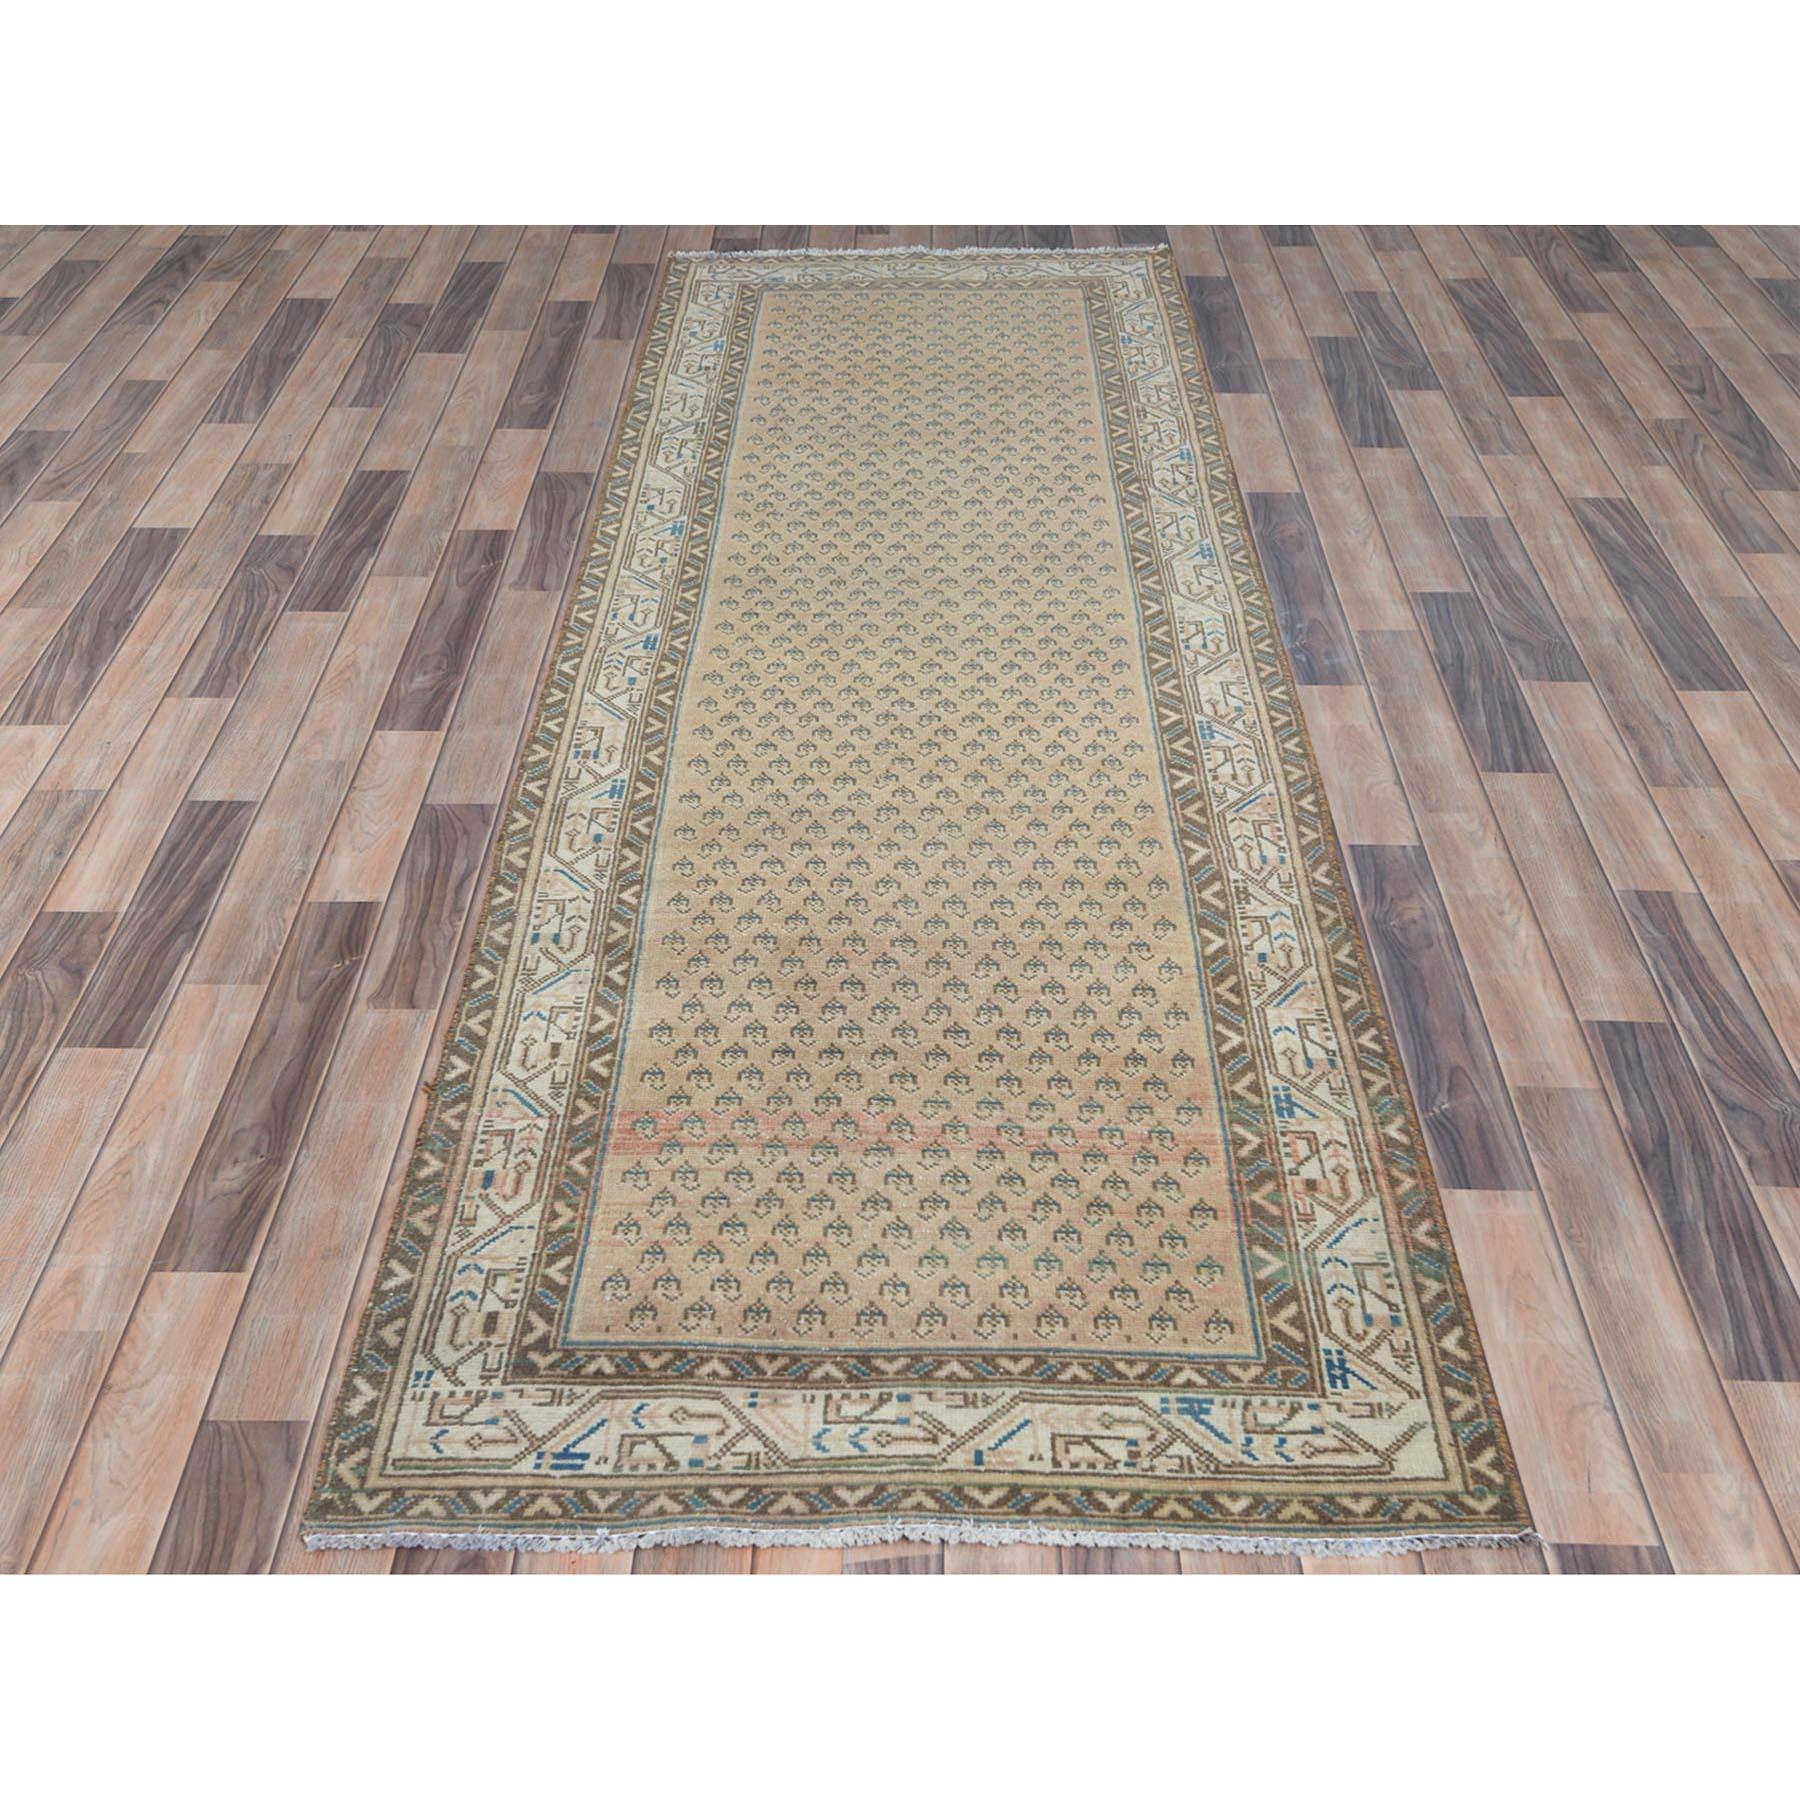 This fabulous hand-knotted carpet has been created and designed for extra strength and durability. This rug has been handcrafted for weeks in the traditional method that is used to make
Exact Rug Size in Feet and Inches : 3'3